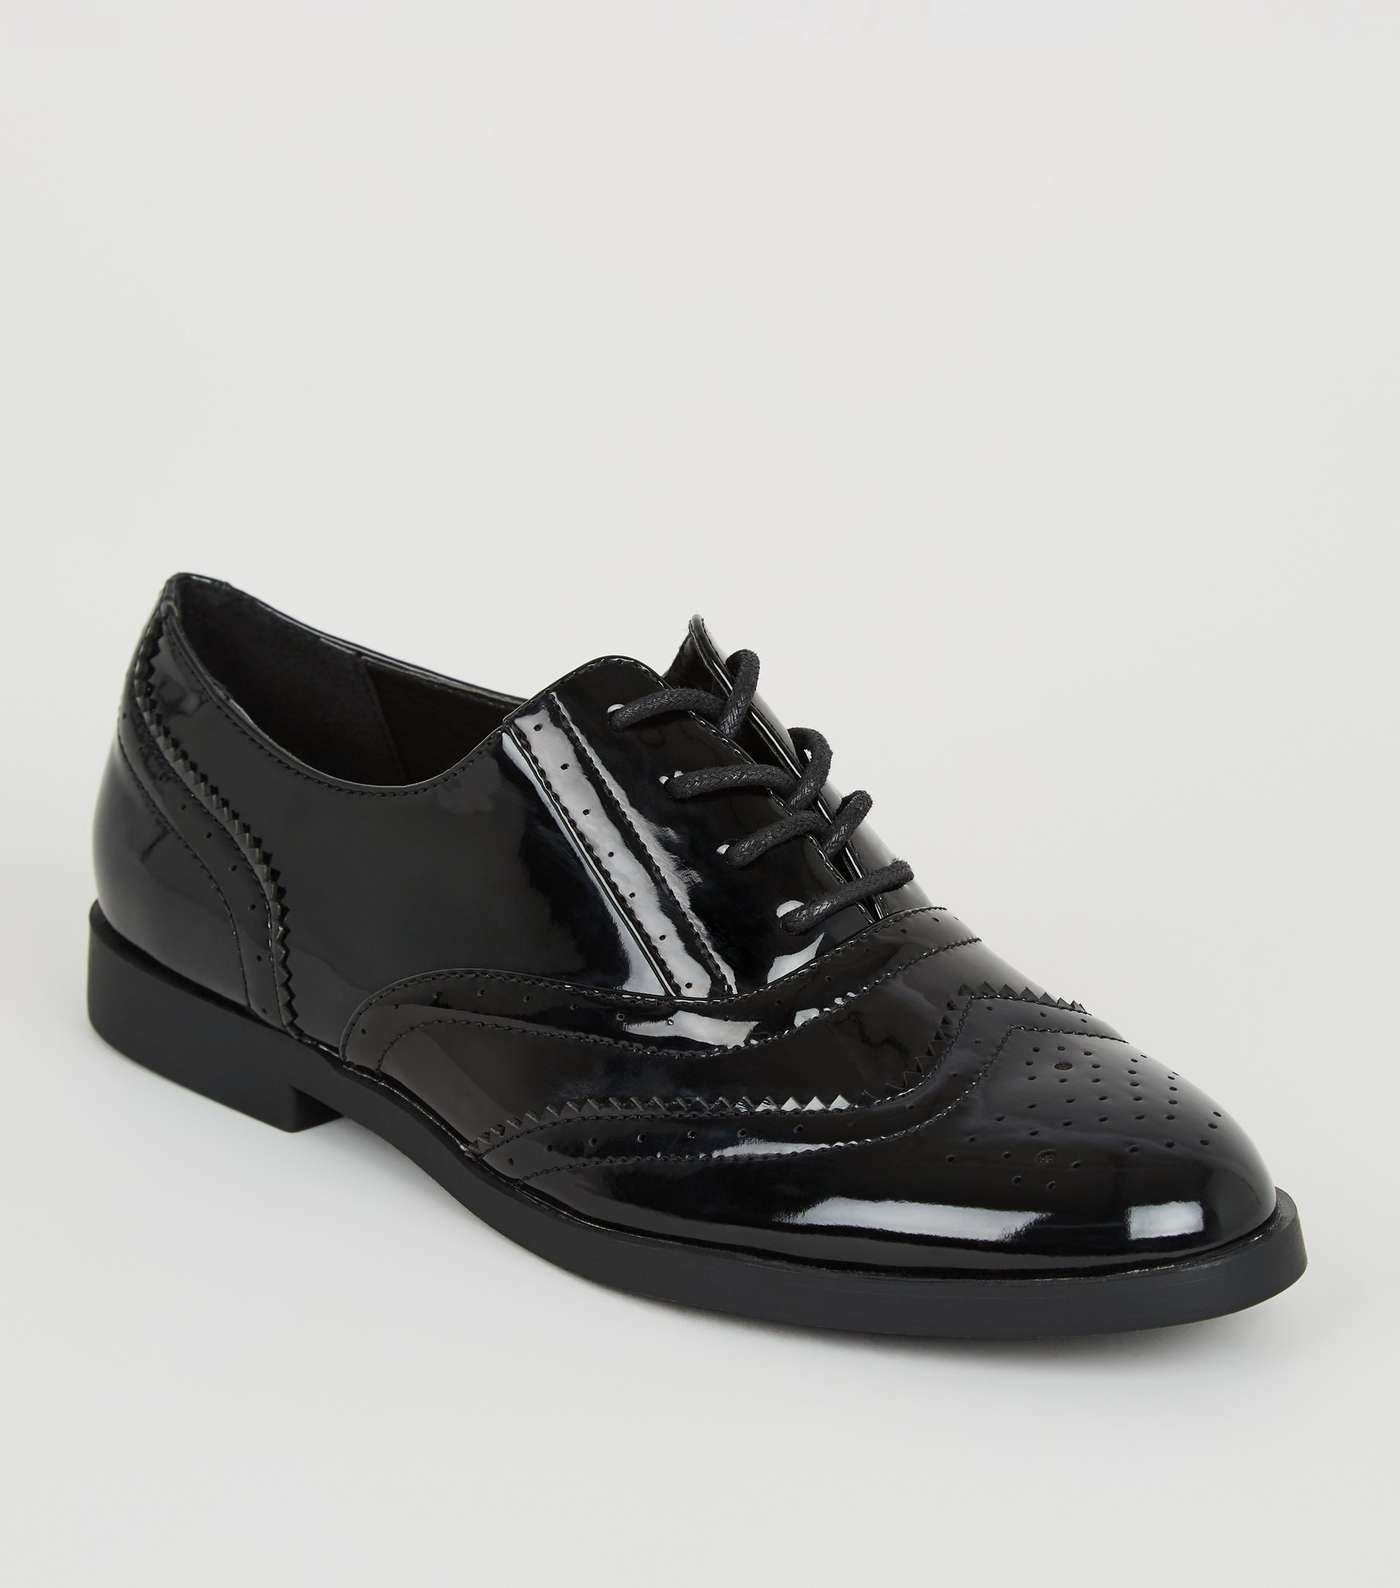 Girls Black Patent Lace Up Brogues